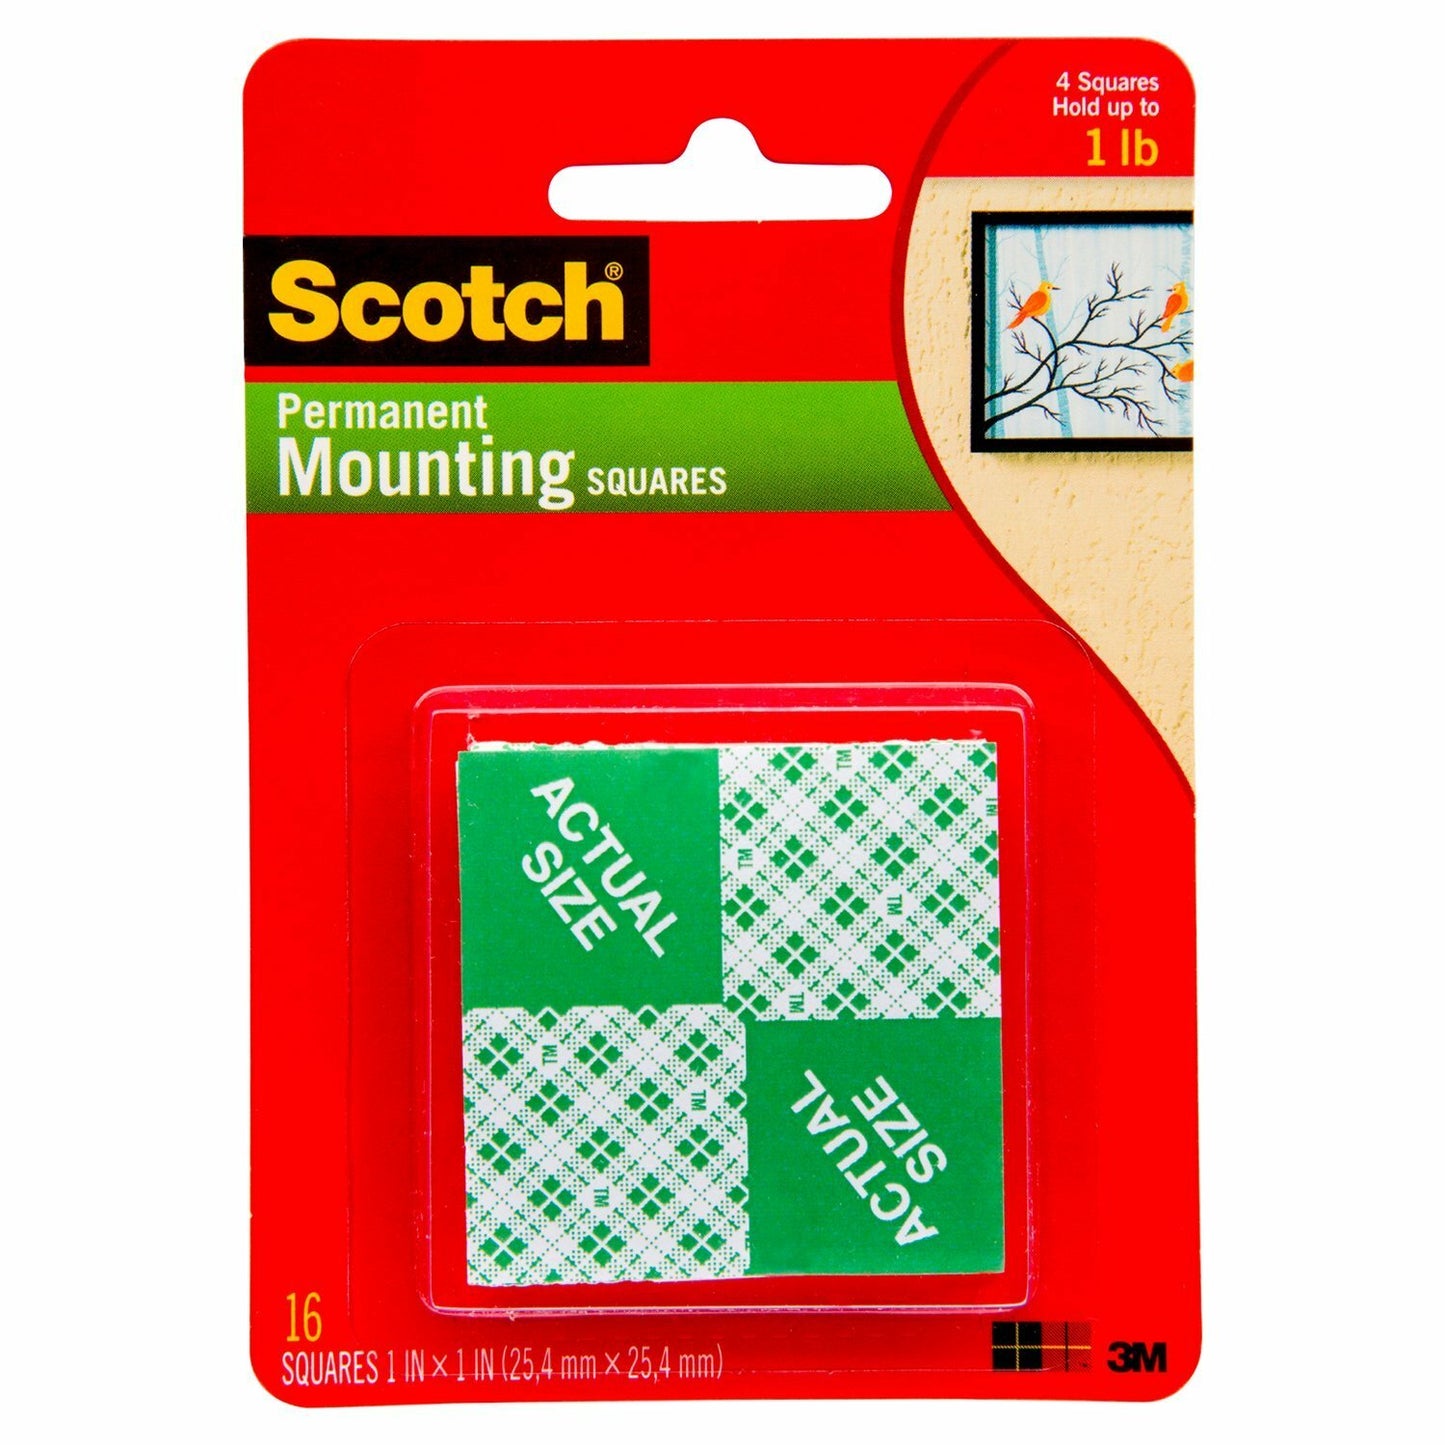 Permanent Mounting Squares